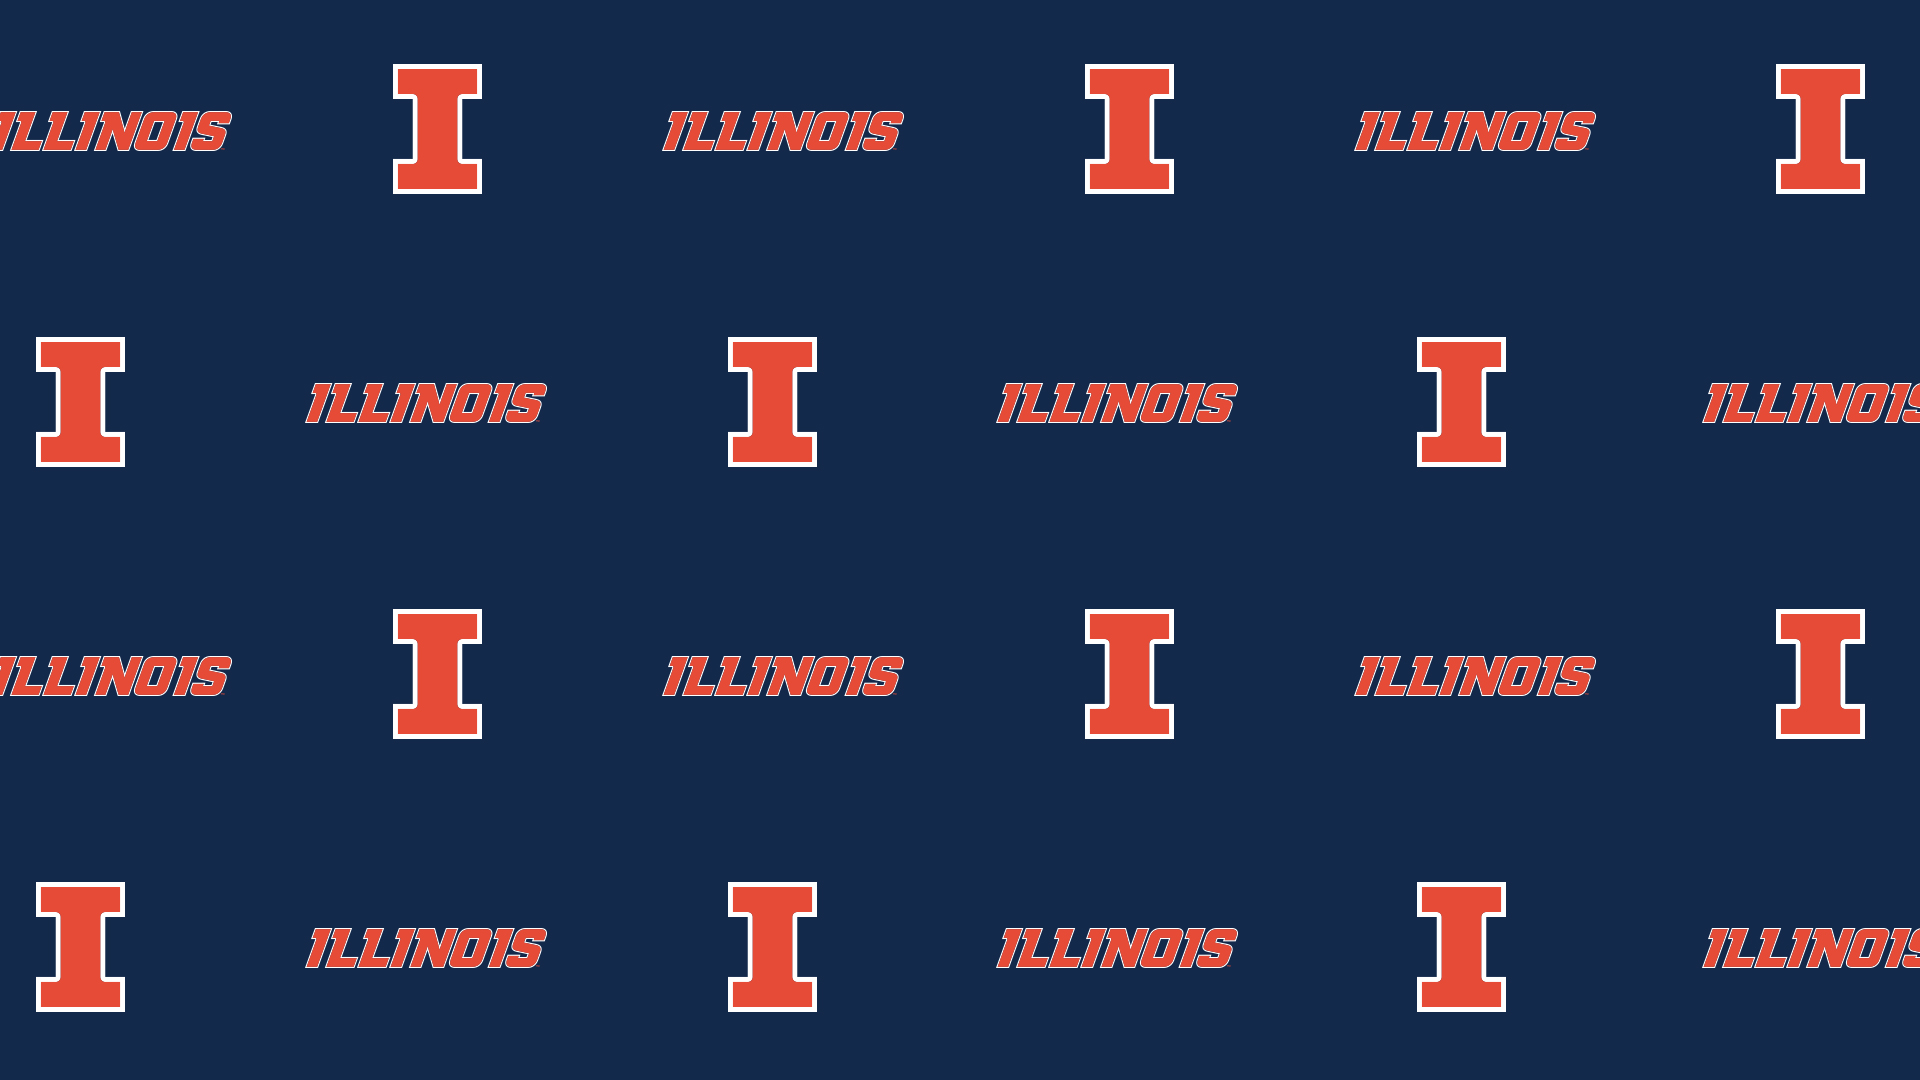 Video Conference Background of Illinois Athletics